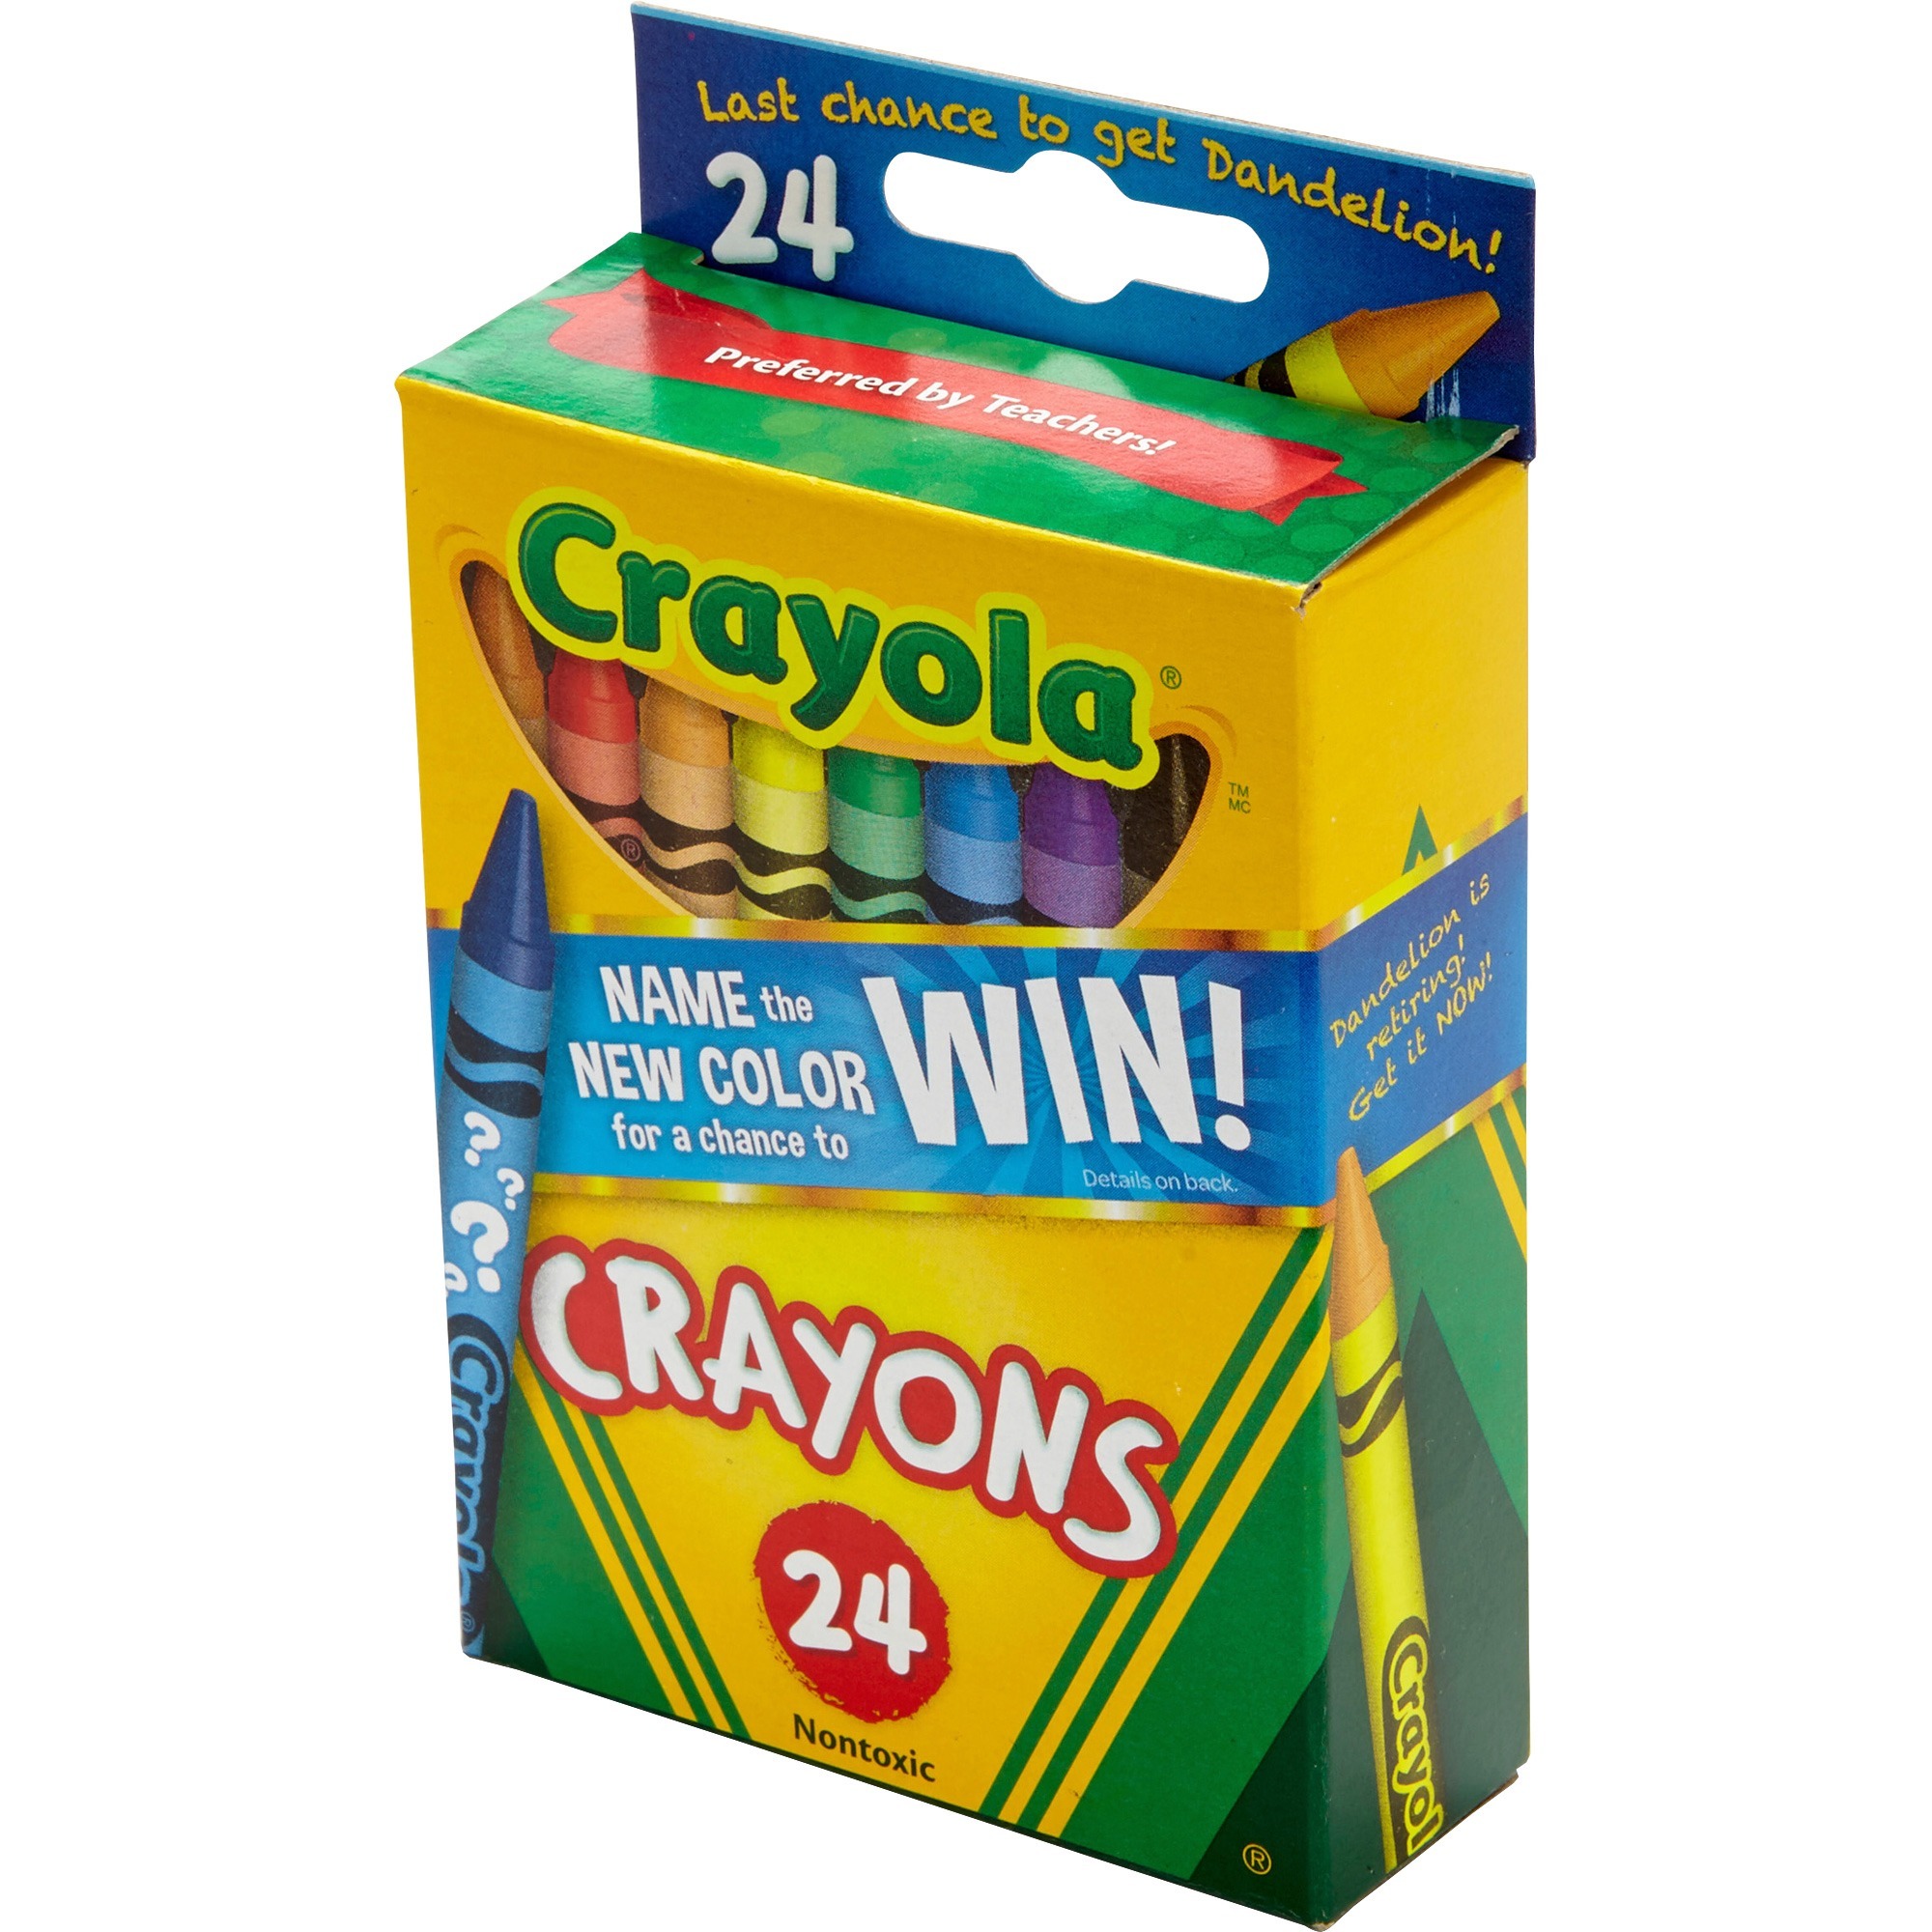 Colorations Regular Crayons - Set of 24 Colors, 4 Packs